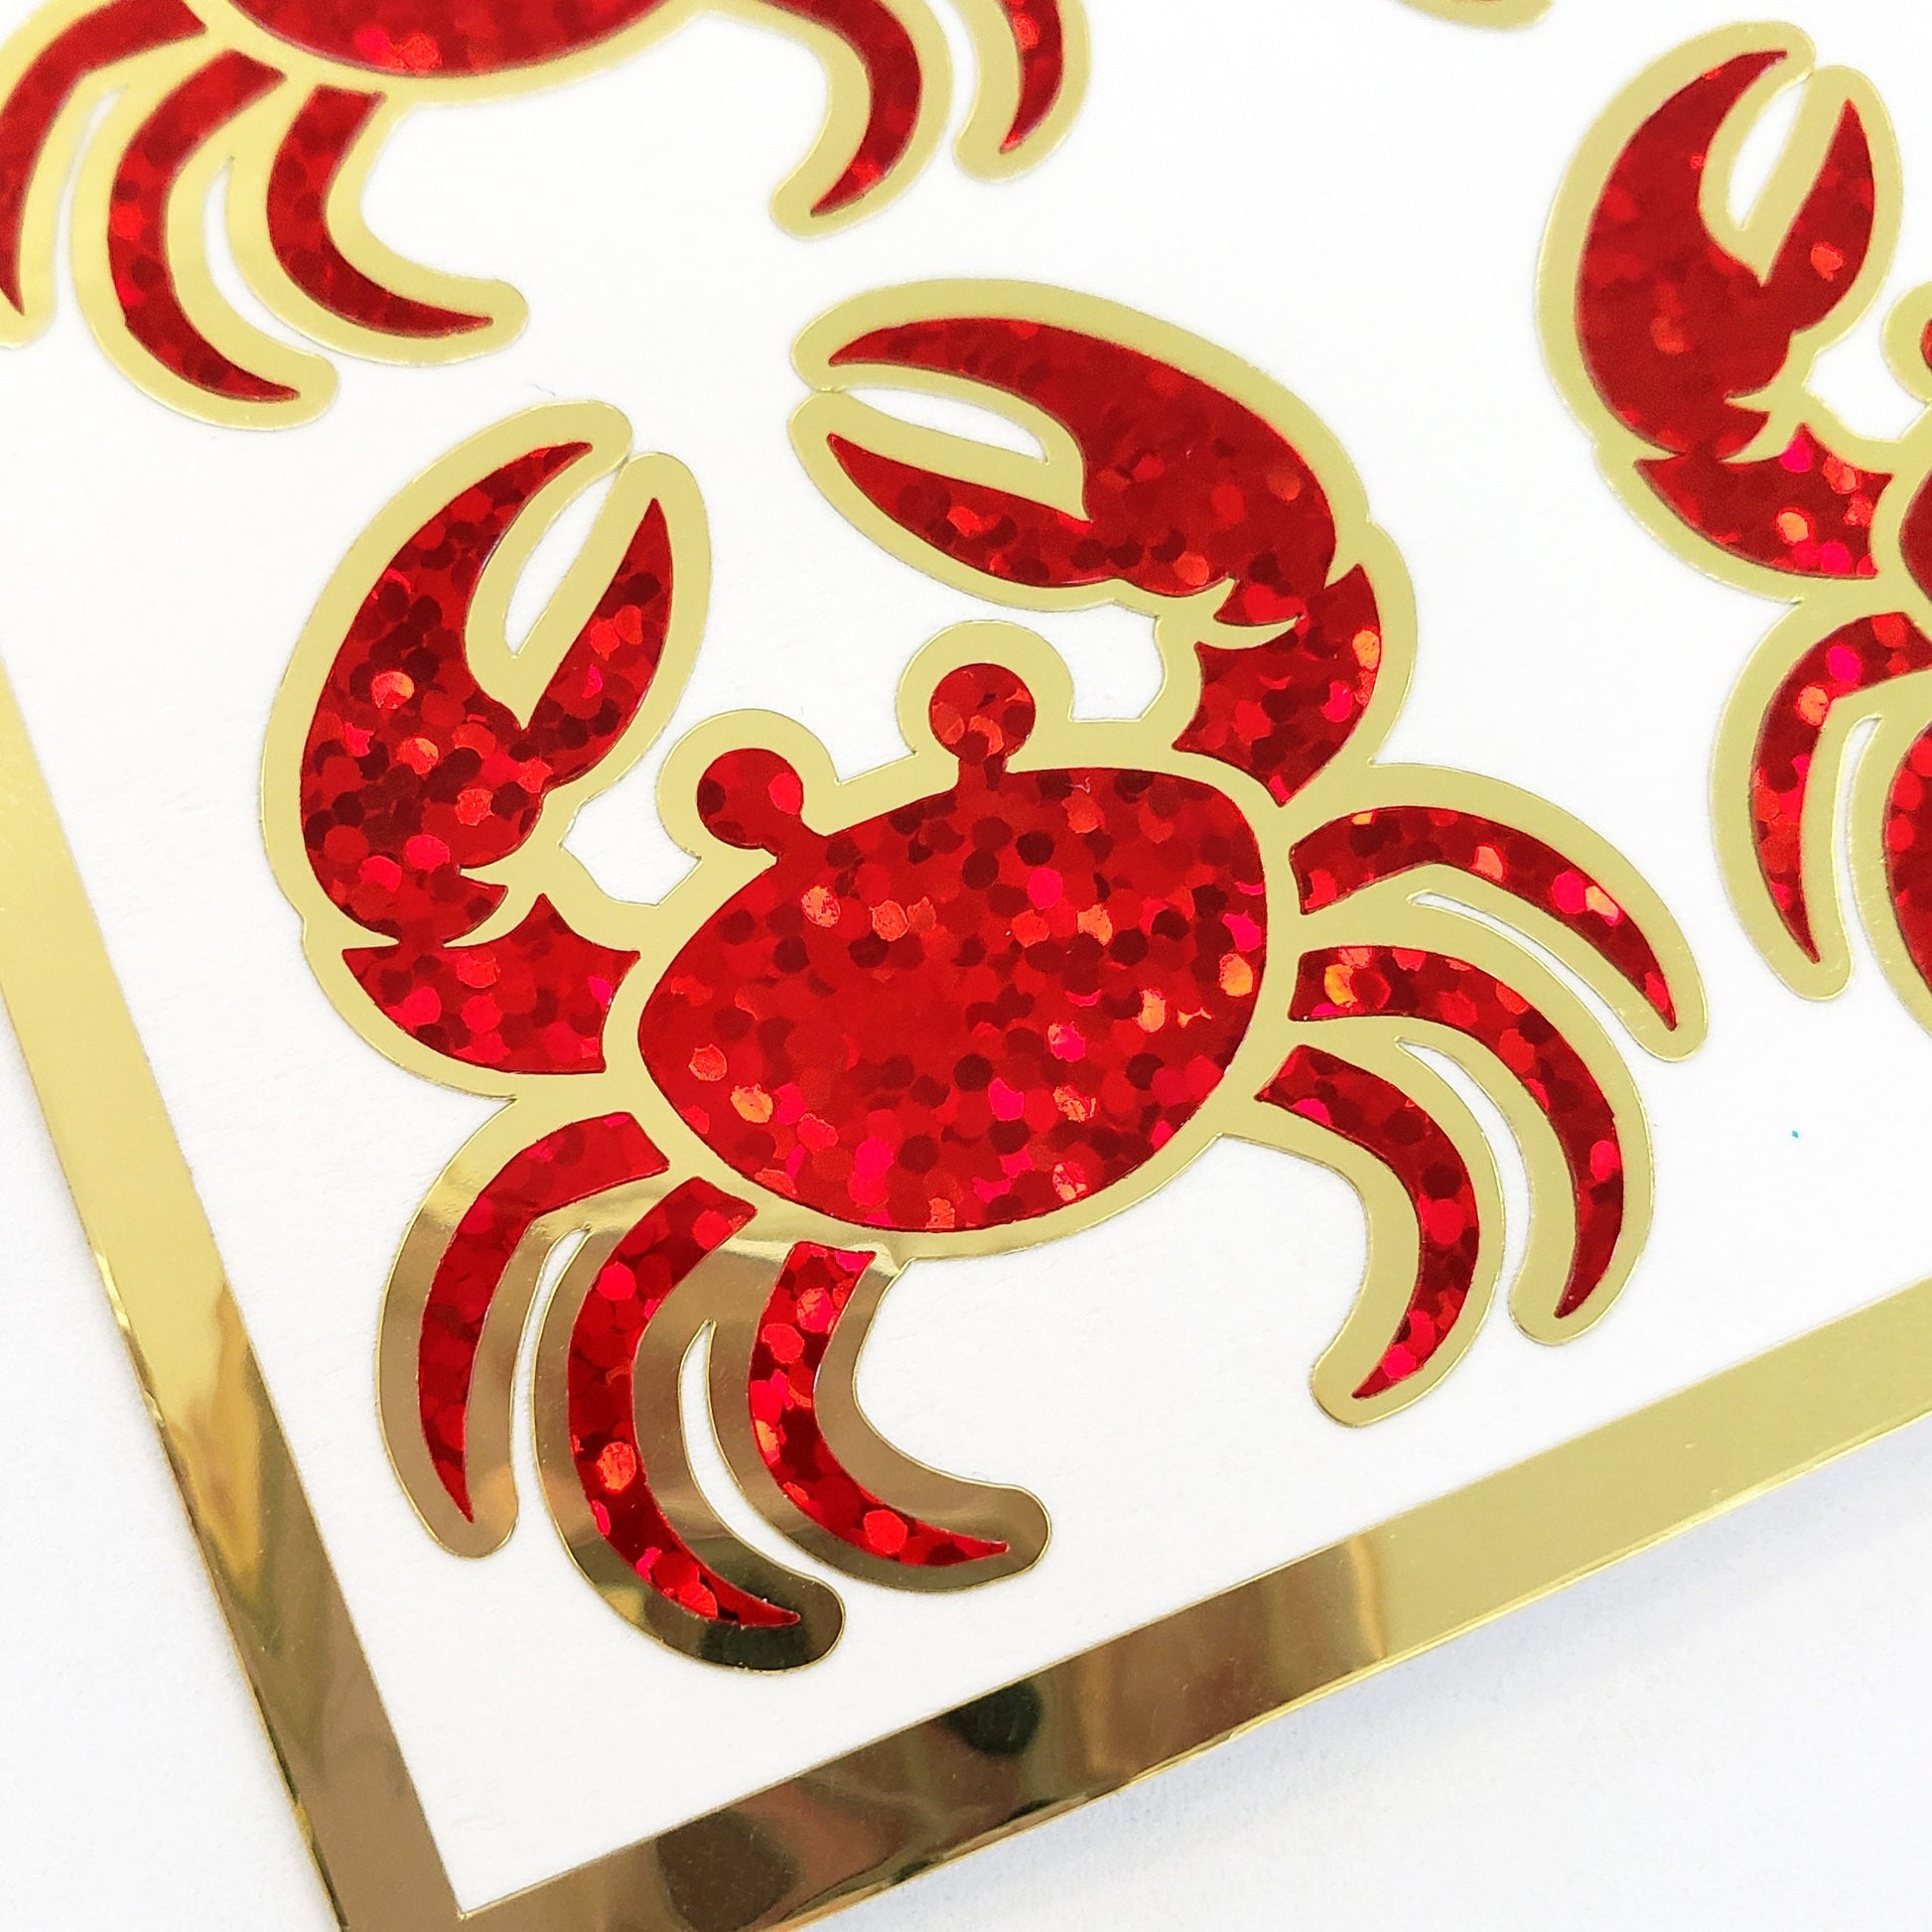 Crab Stickers, set of 12 sparkly red and gold vinyl decals for beach party, envelope seals, journals, laptop stickers, coastal decor.